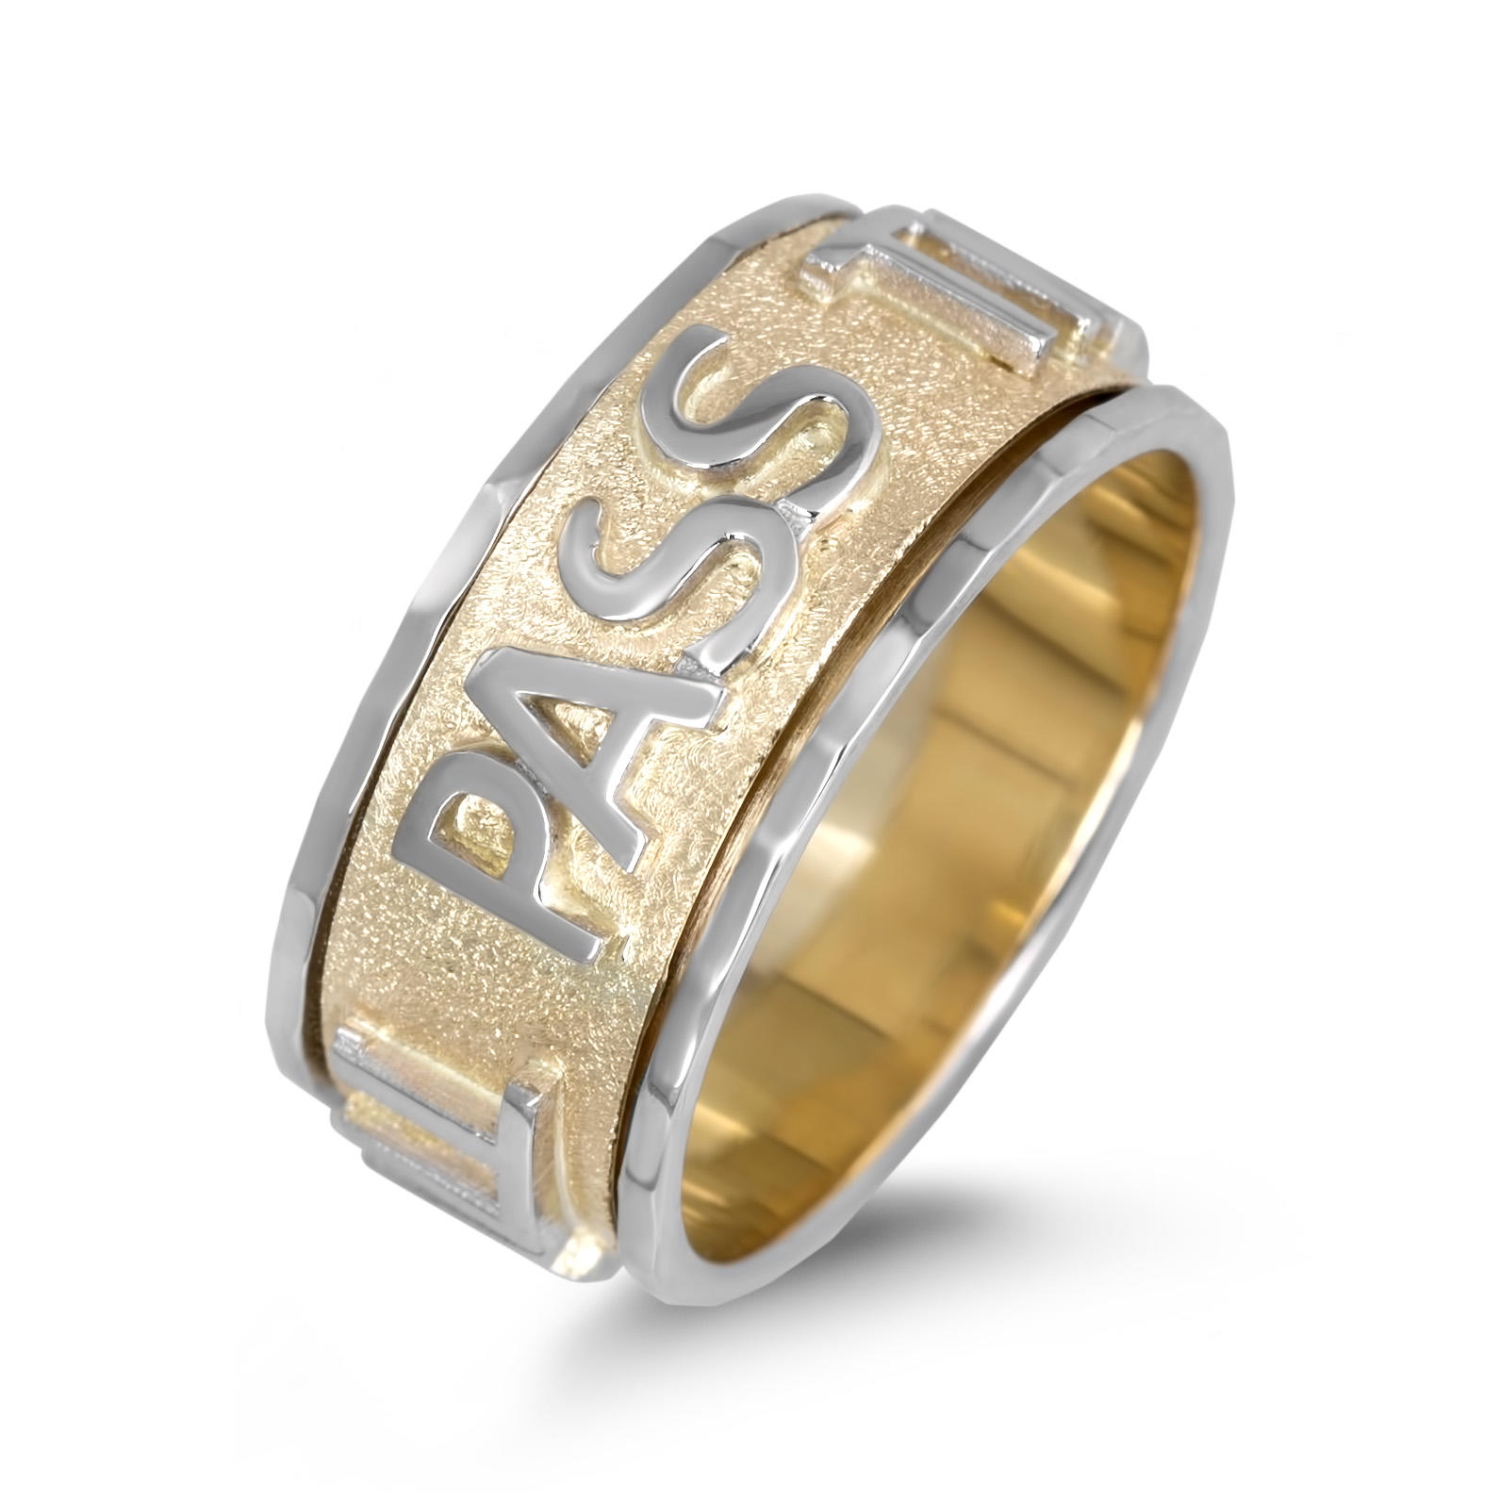 14K Gold "This Too Shall Pass" Spinning Ring - 1